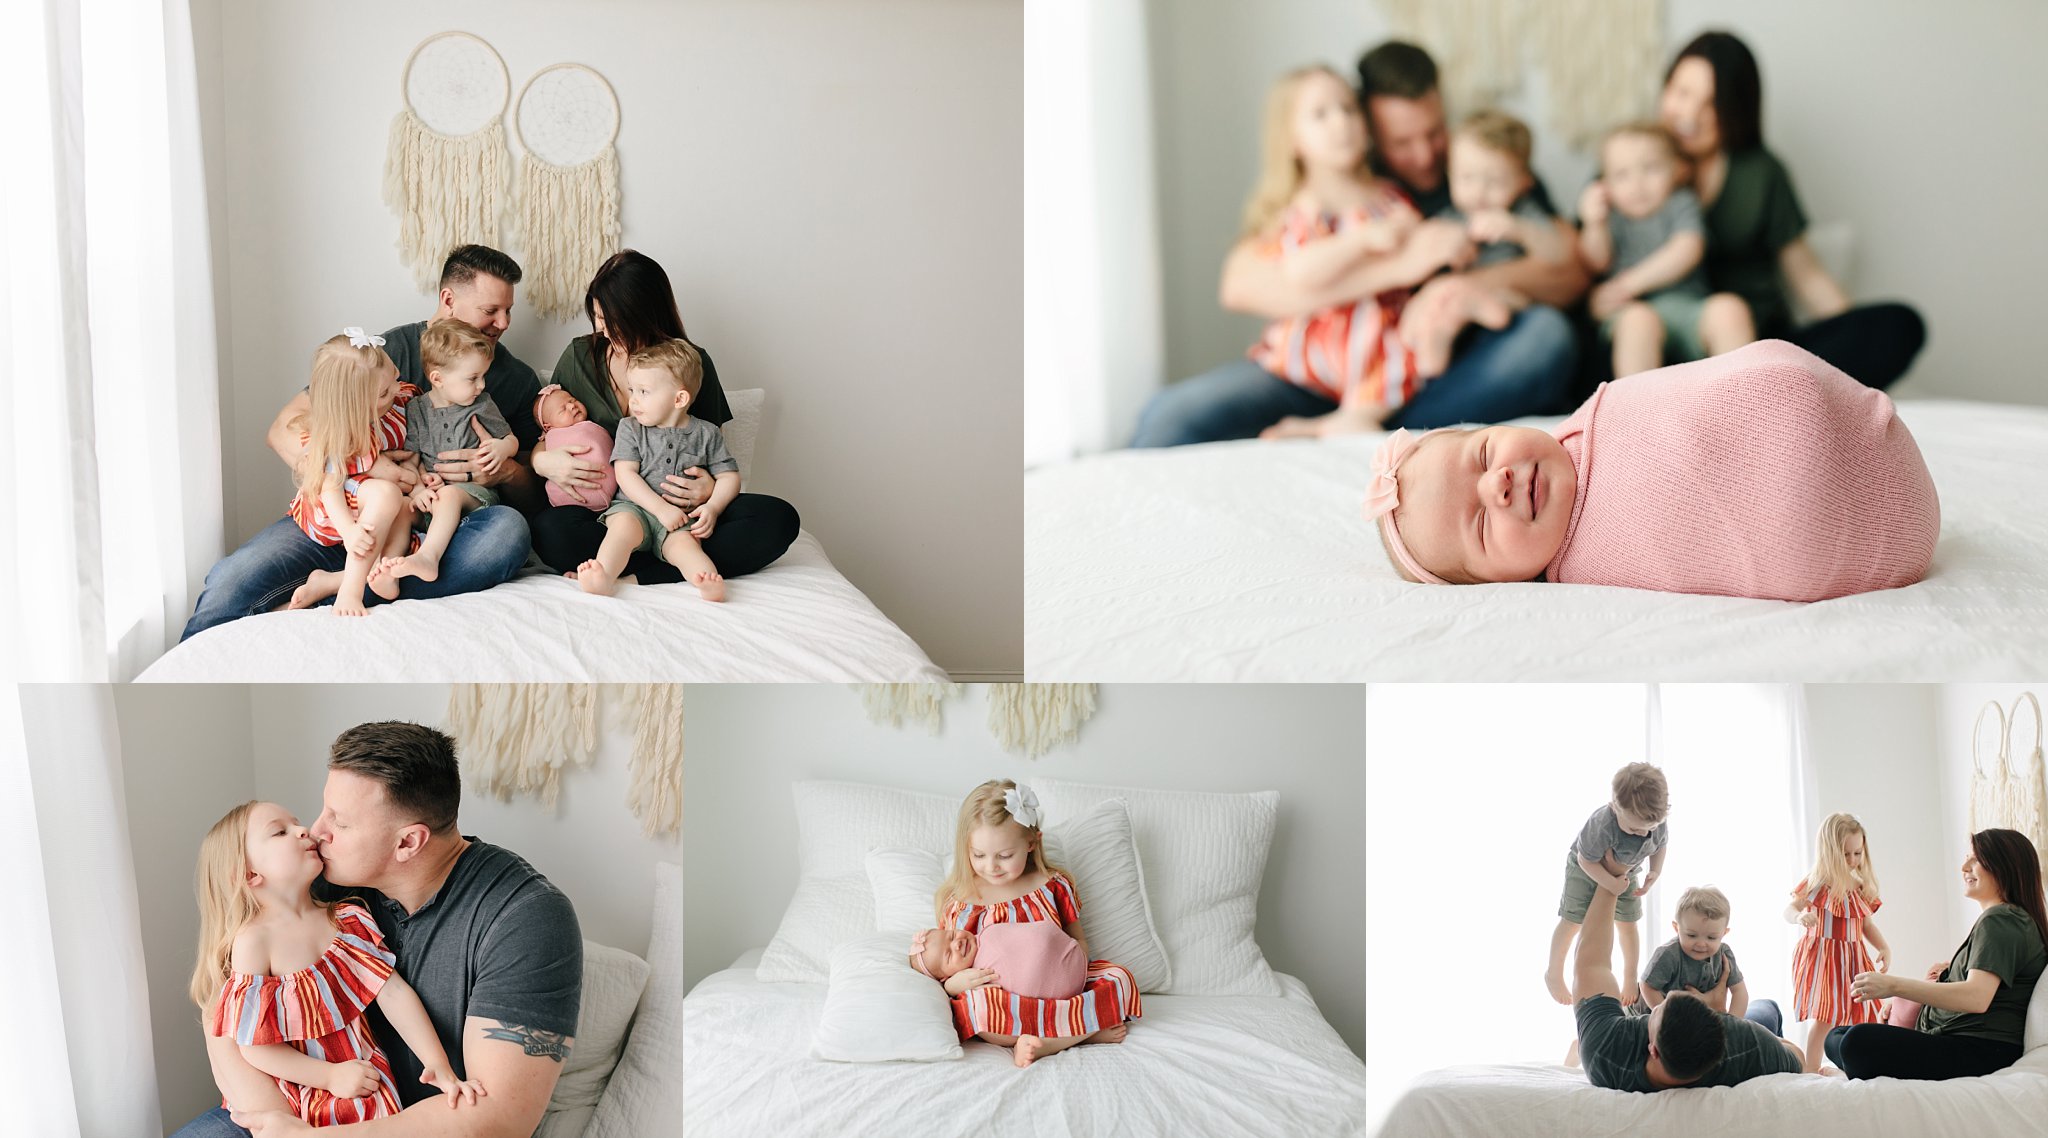 family of 6 with newborn baby girl snuggling on white bed in white room with cream dream catchers on wall